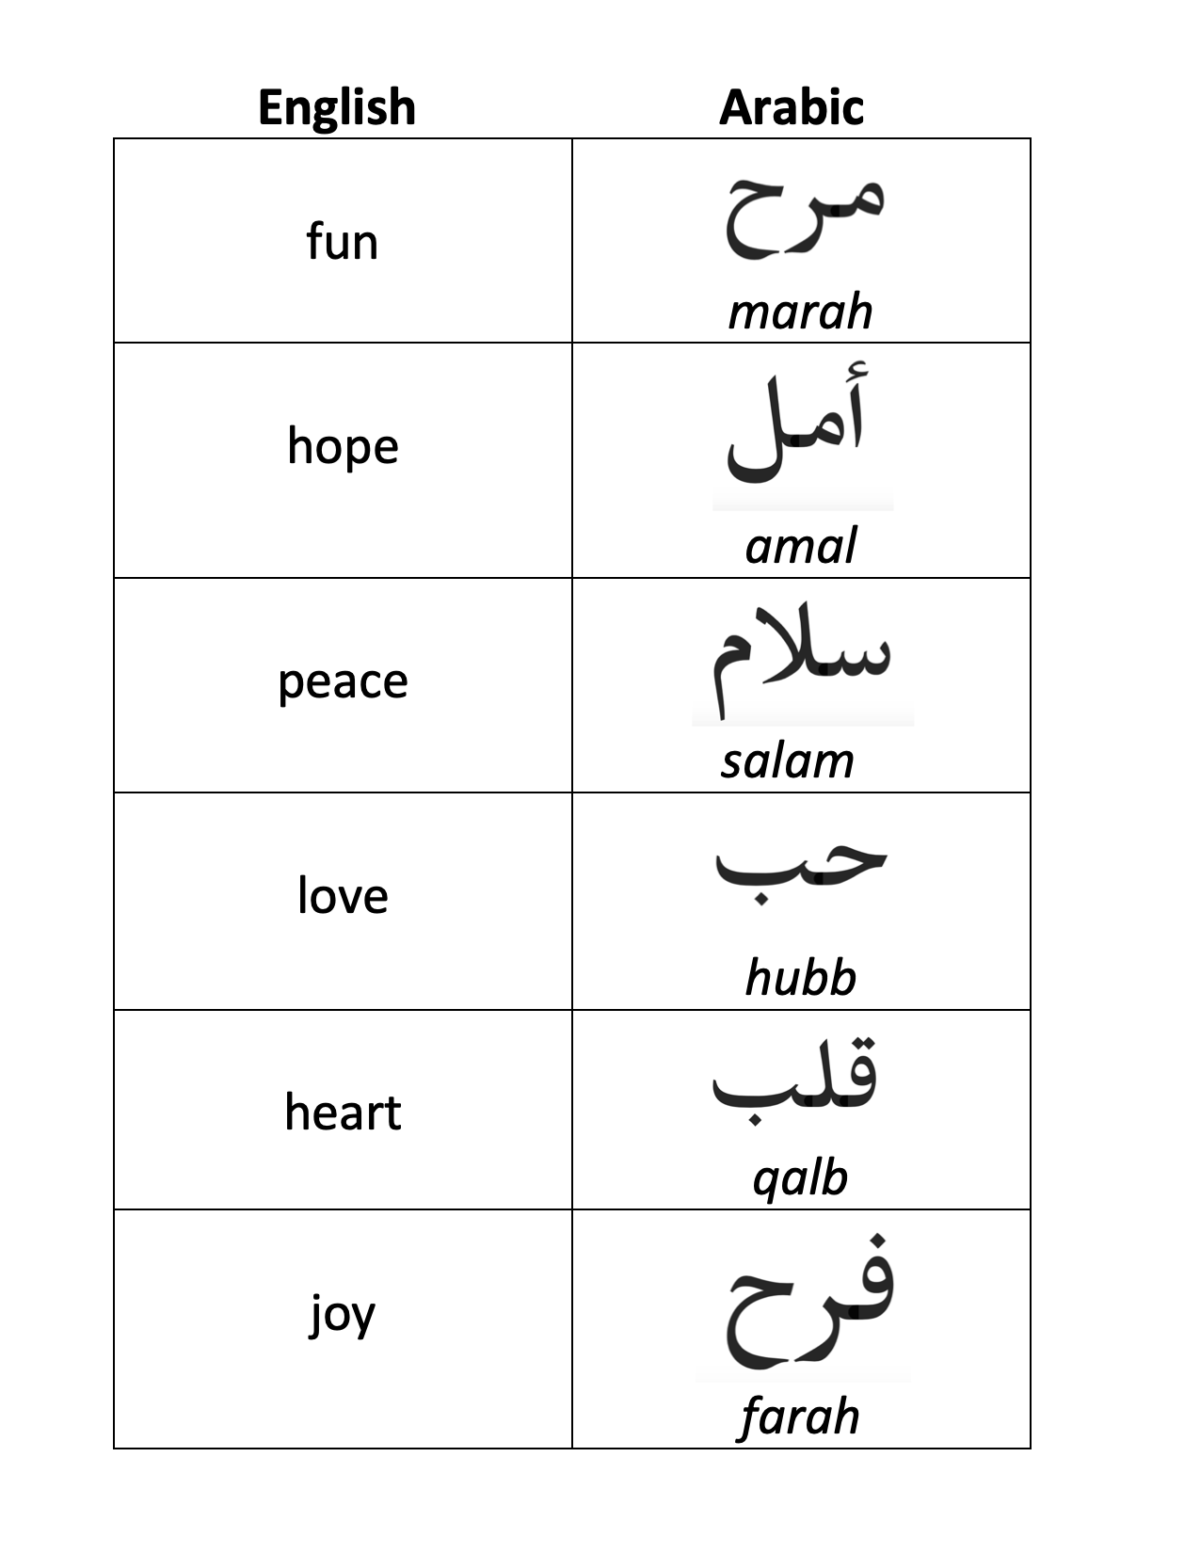 Graphic of English and Arabic words.